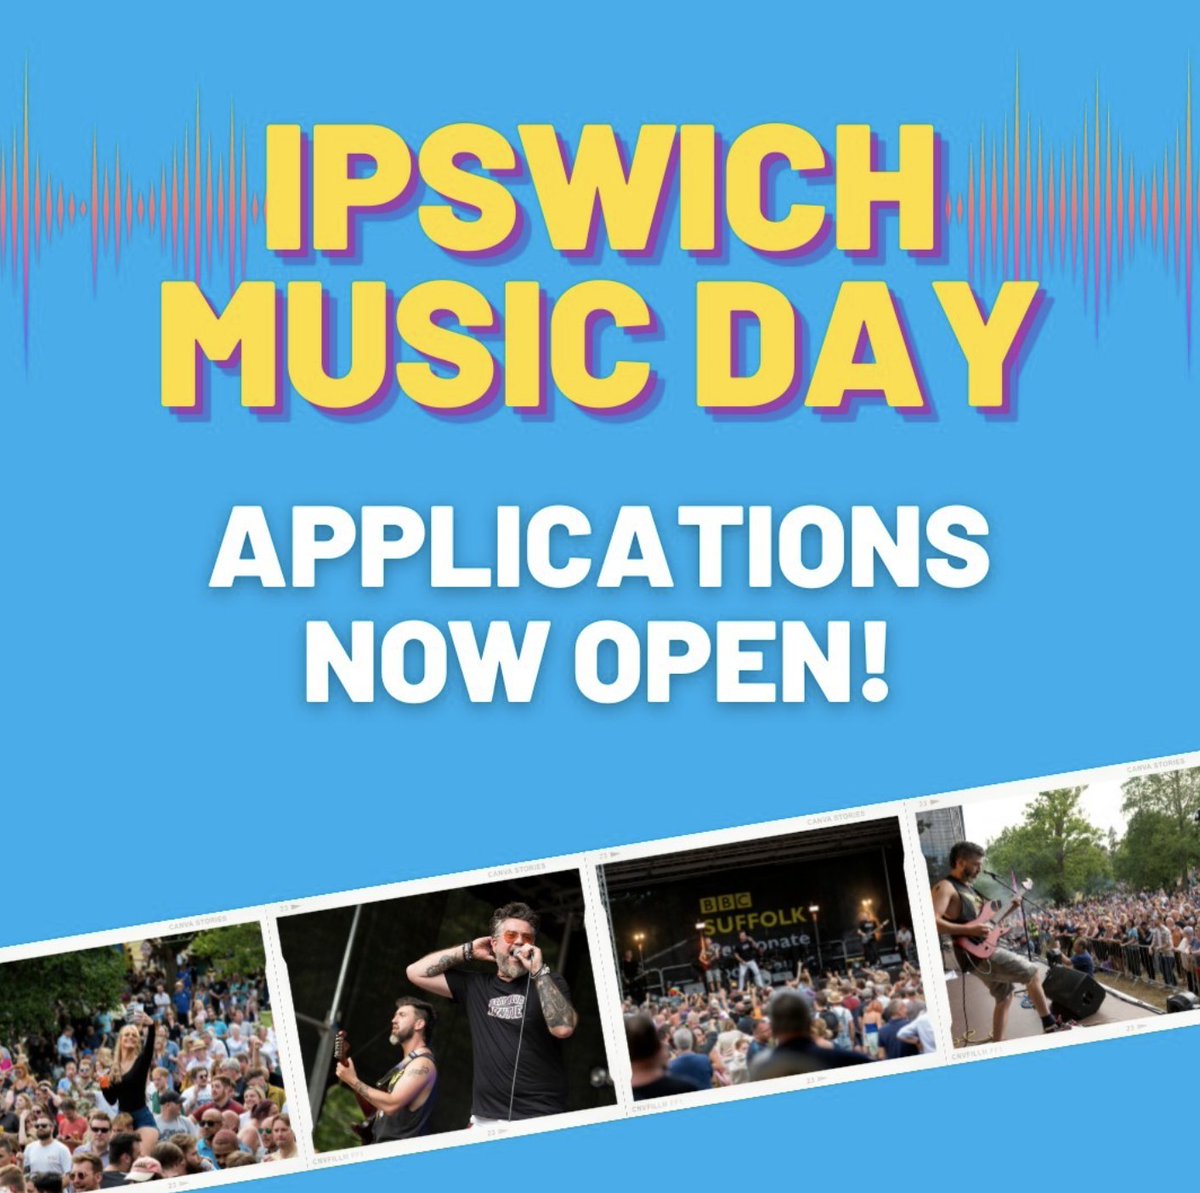 📢 Applications are OPEN for Ipswich Music Day 2023! ✨ Applications close at midnight on Friday 24 March 2023. Apply here: ipswichentertains.co.uk/ipswichmusicda…